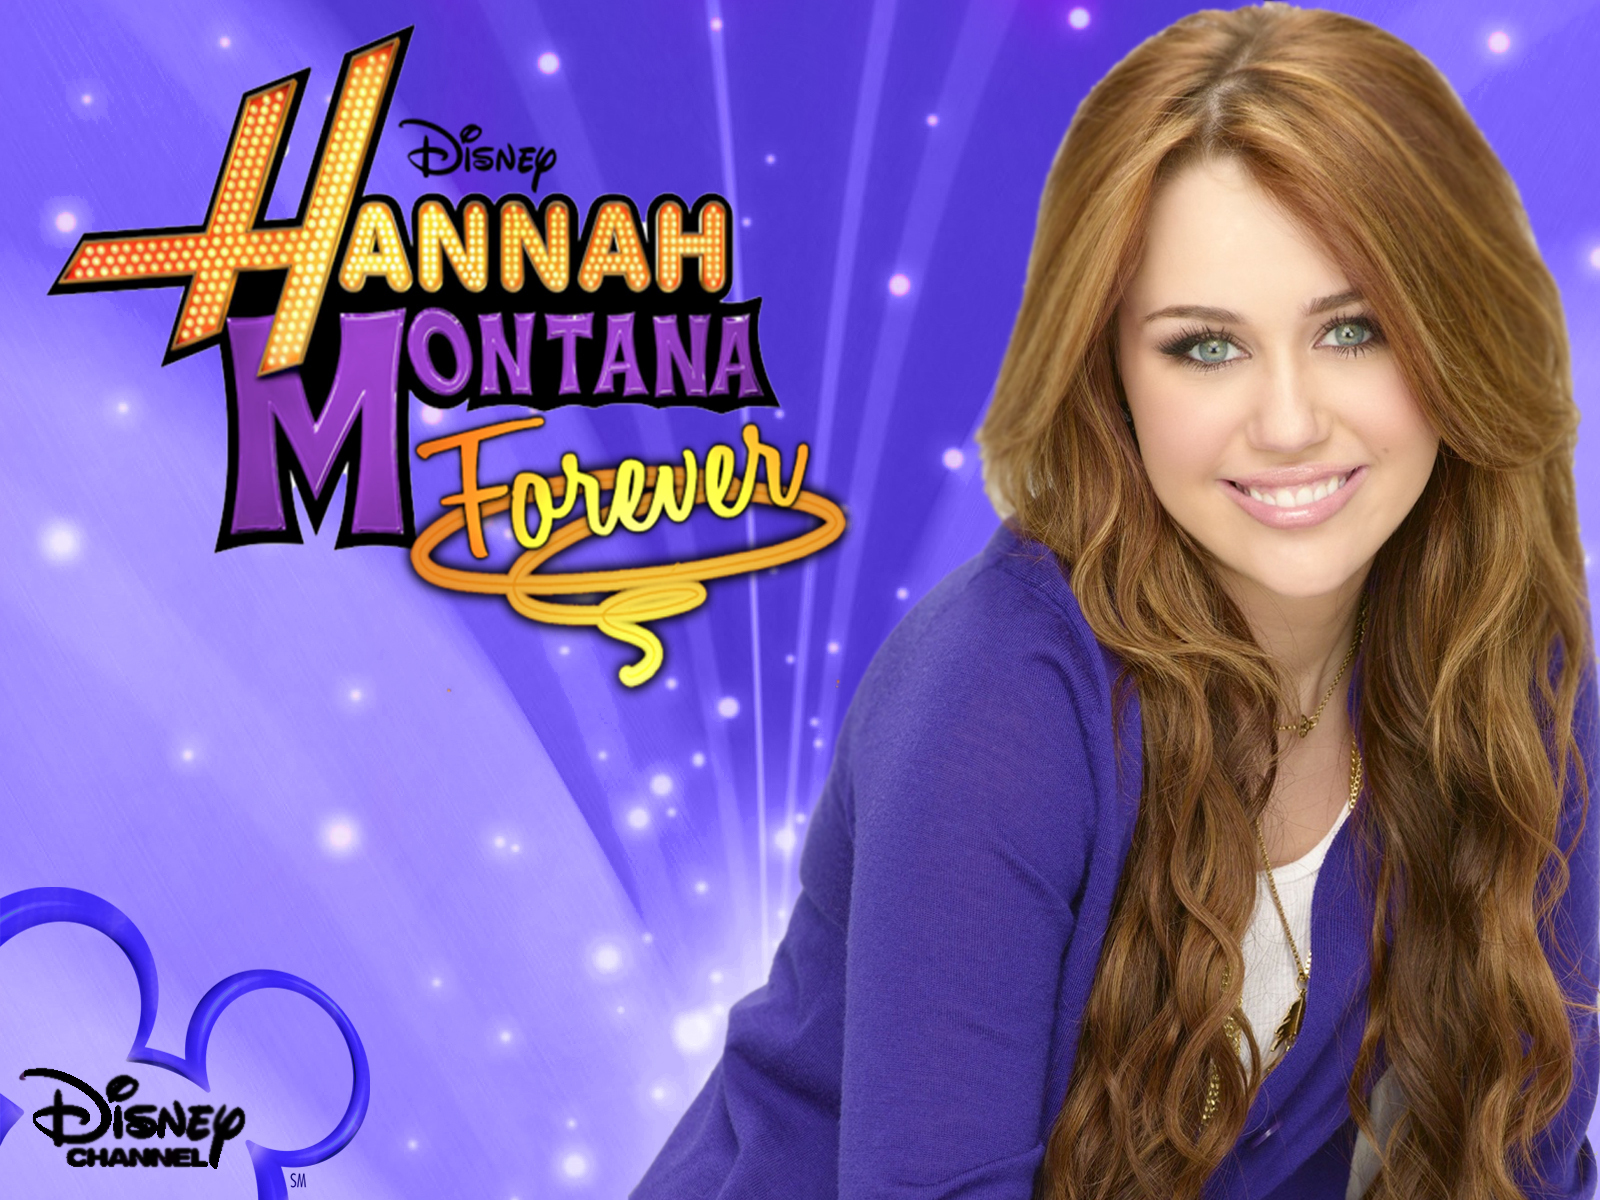 Hannah Montana hannah montana forever pic by pearl as a part of 100 days of hannah